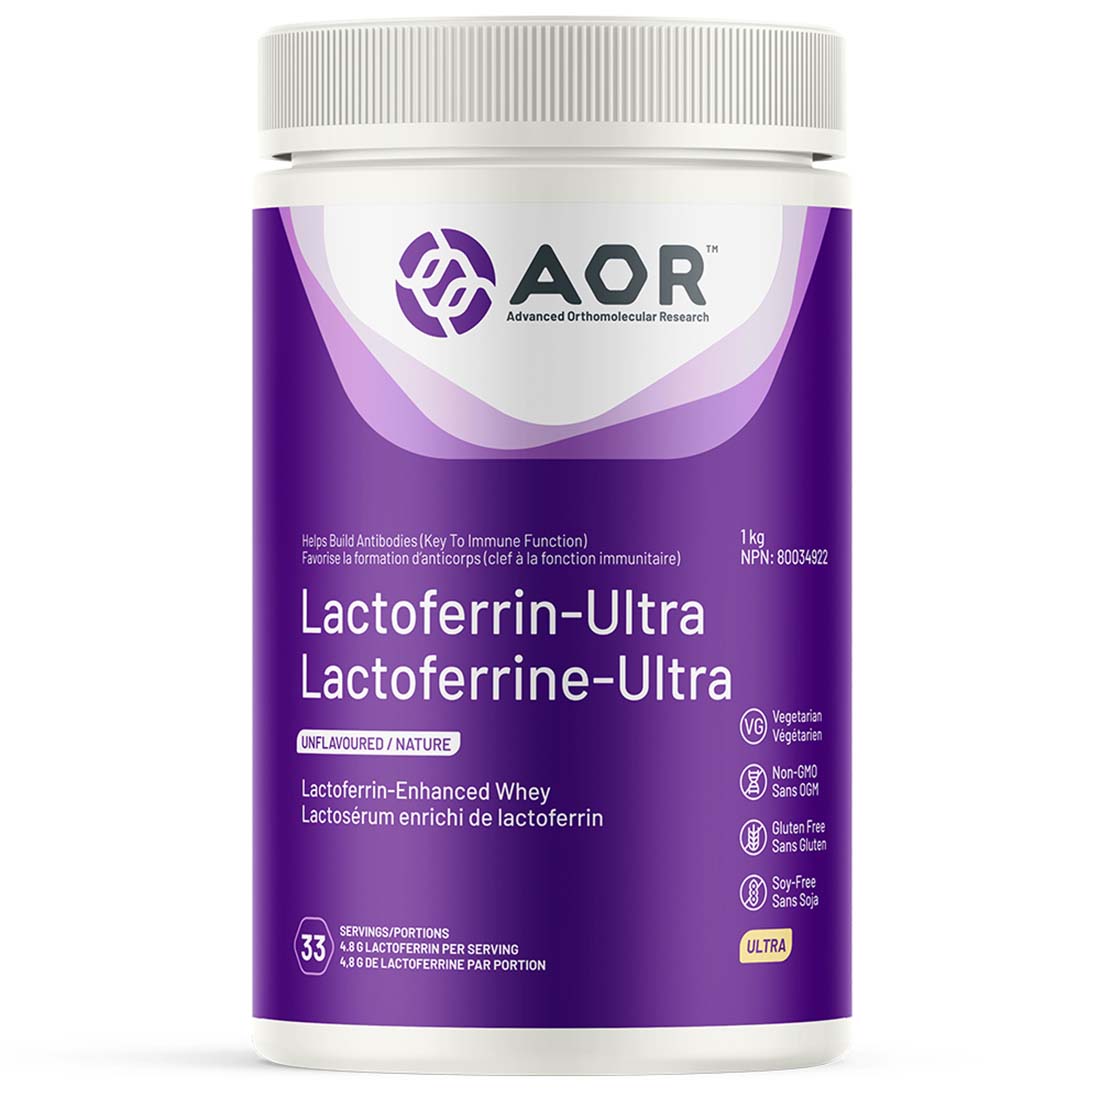 AOR Lactoferrin Ultra, 1kg Powder (Call us to place an order)